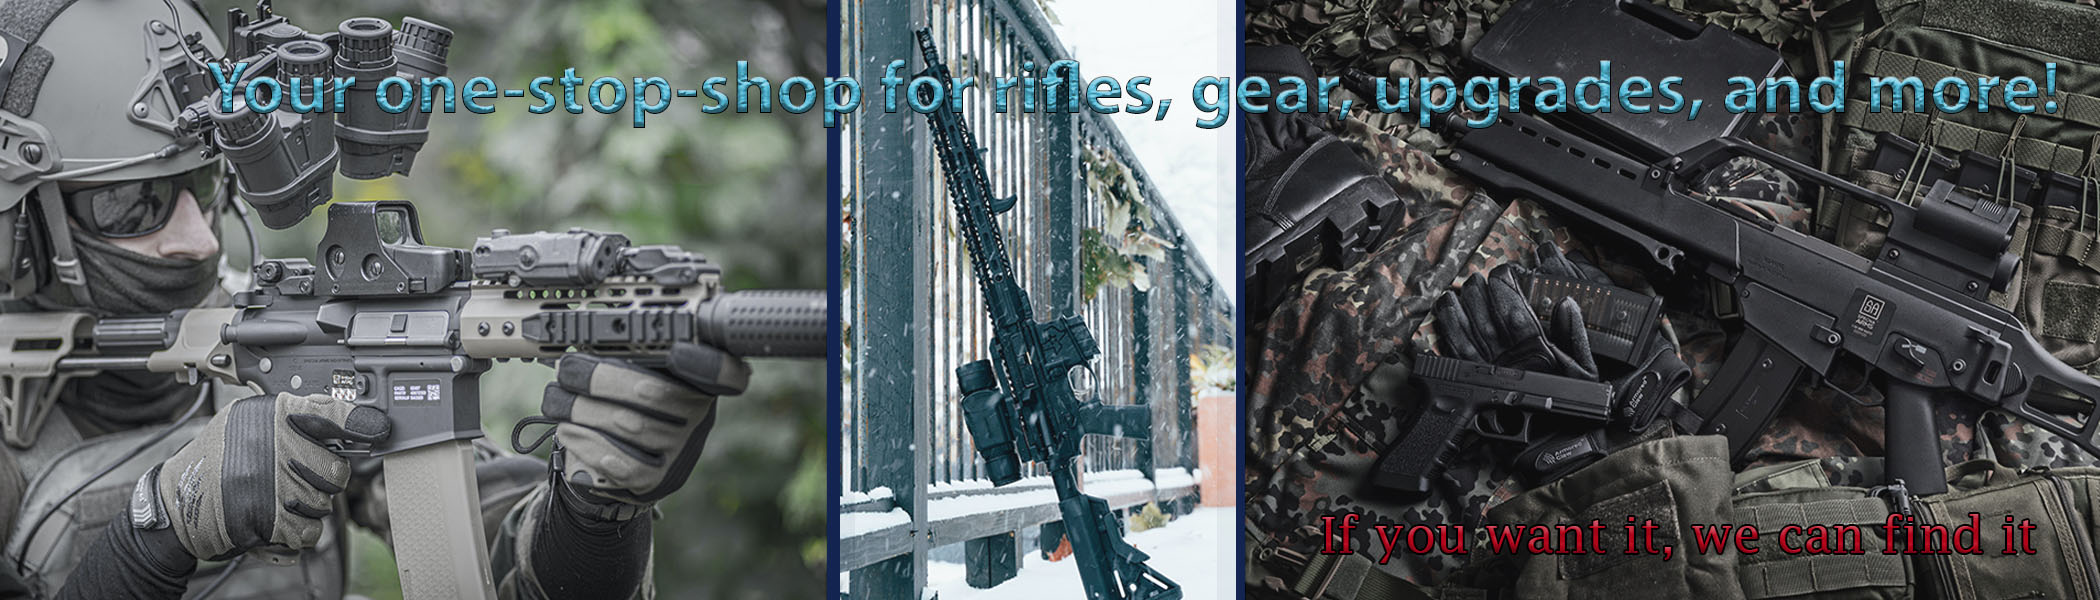 Airsoft banner new